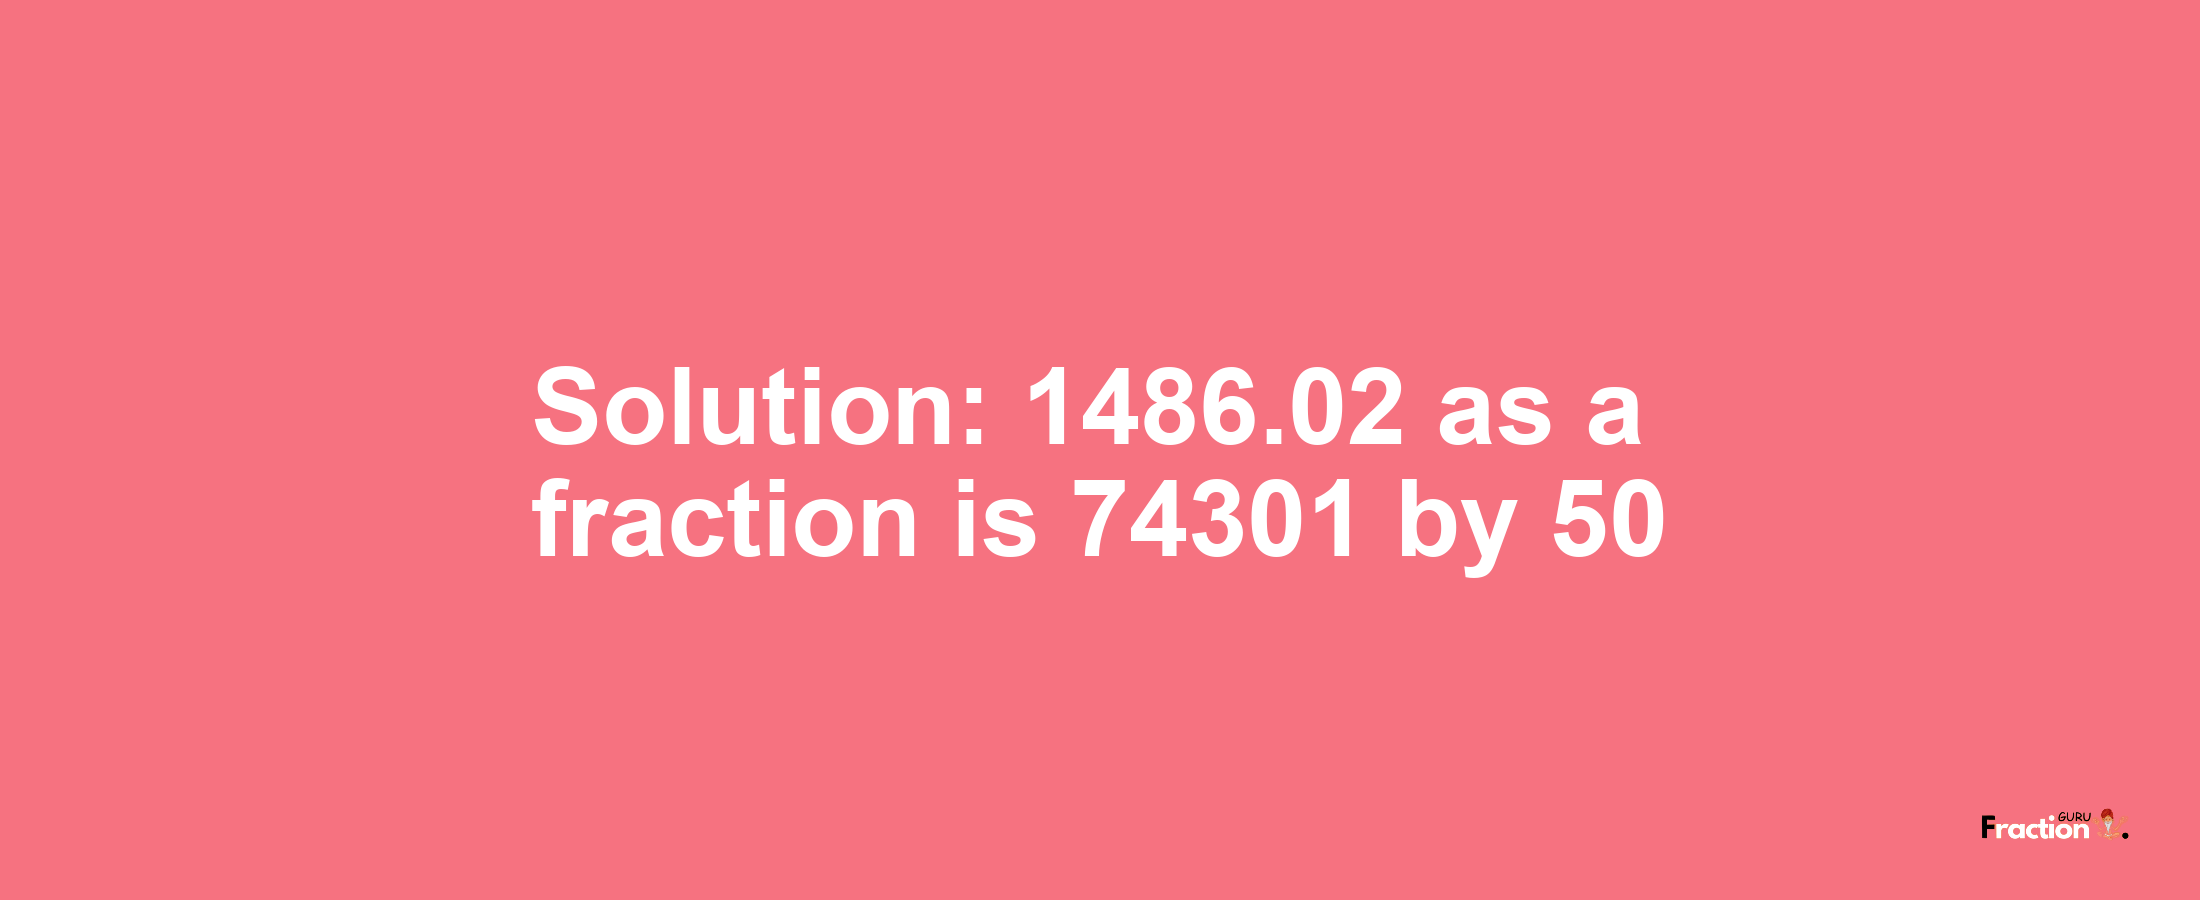 Solution:1486.02 as a fraction is 74301/50